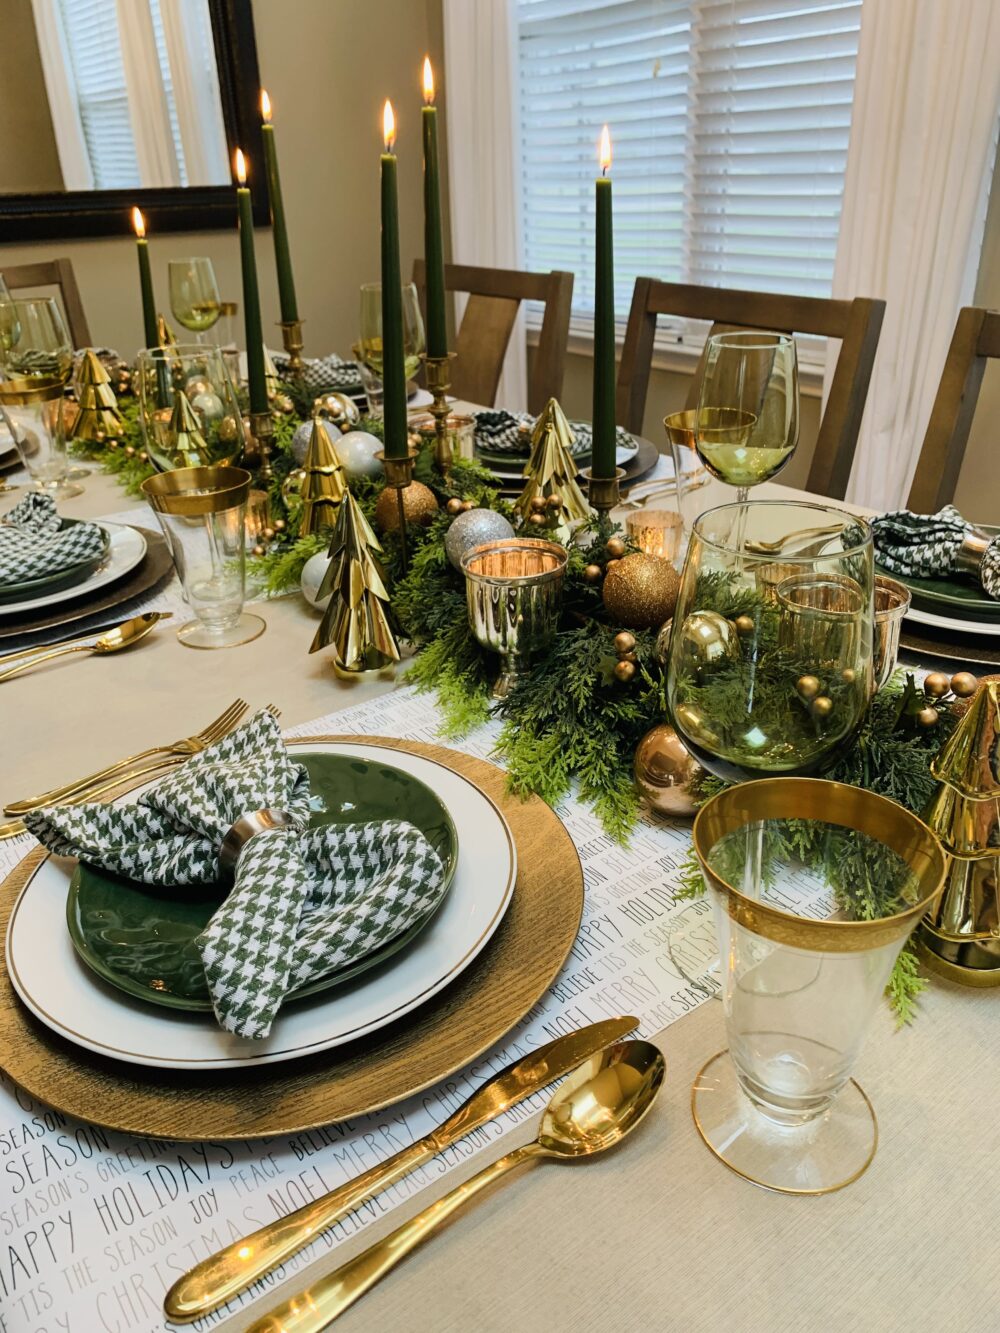 15 Stunning Green & Gold Christmas Tablescapes